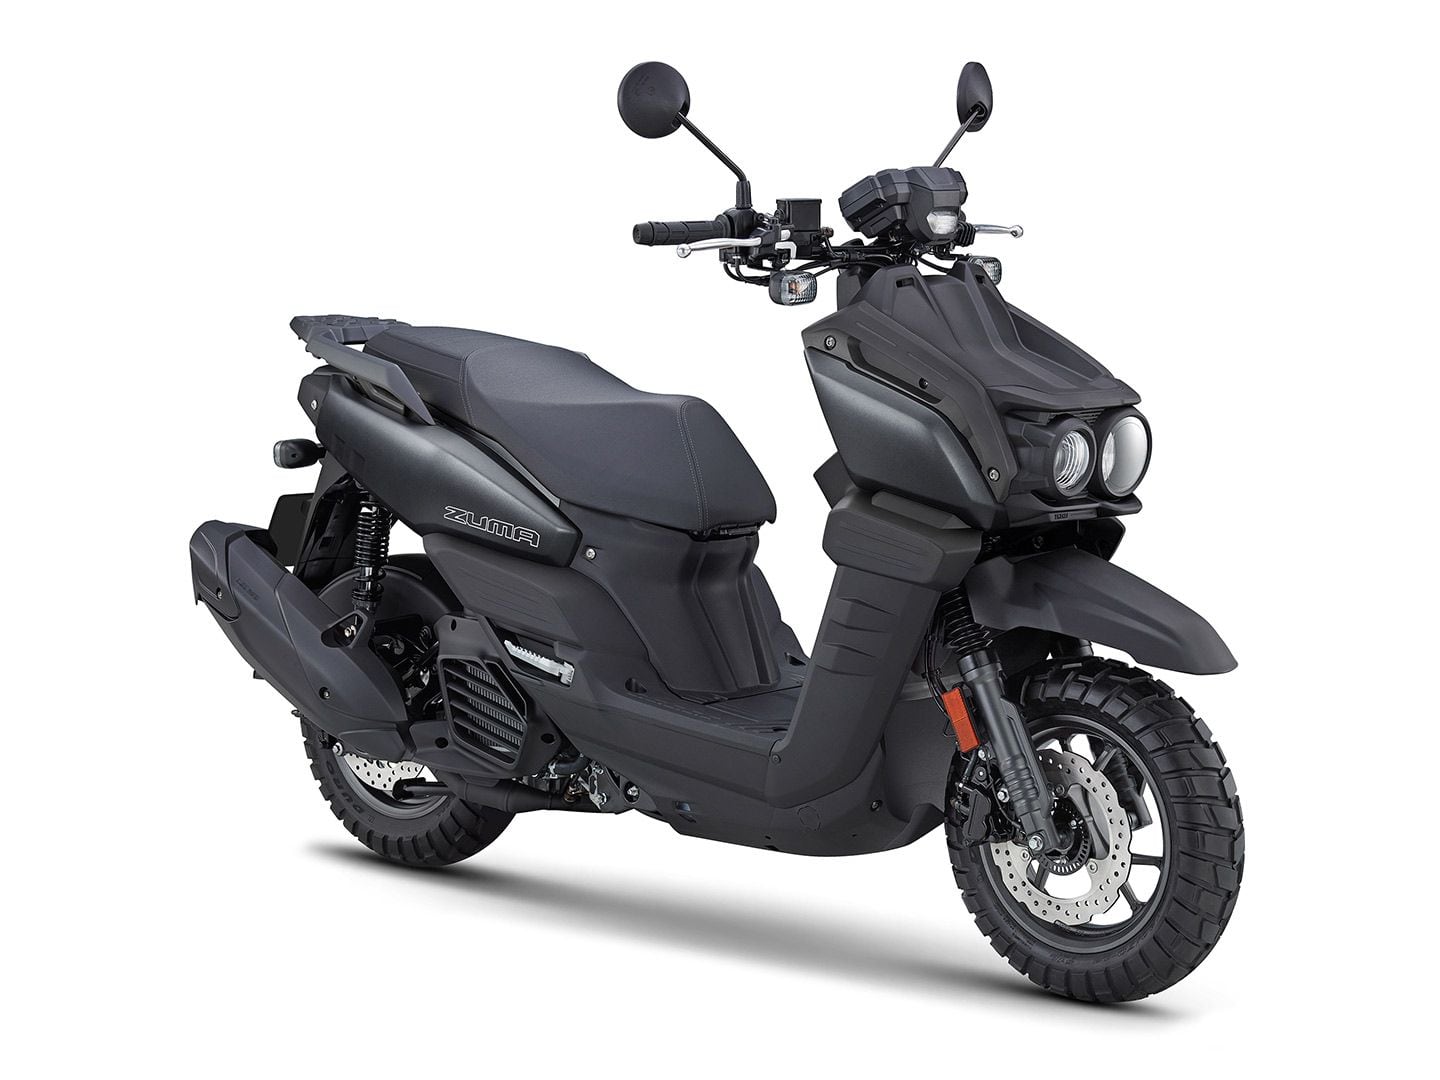 Yamaha’s Zuma 125 is easy to operate, approachable for any skill level, and fully automatic.